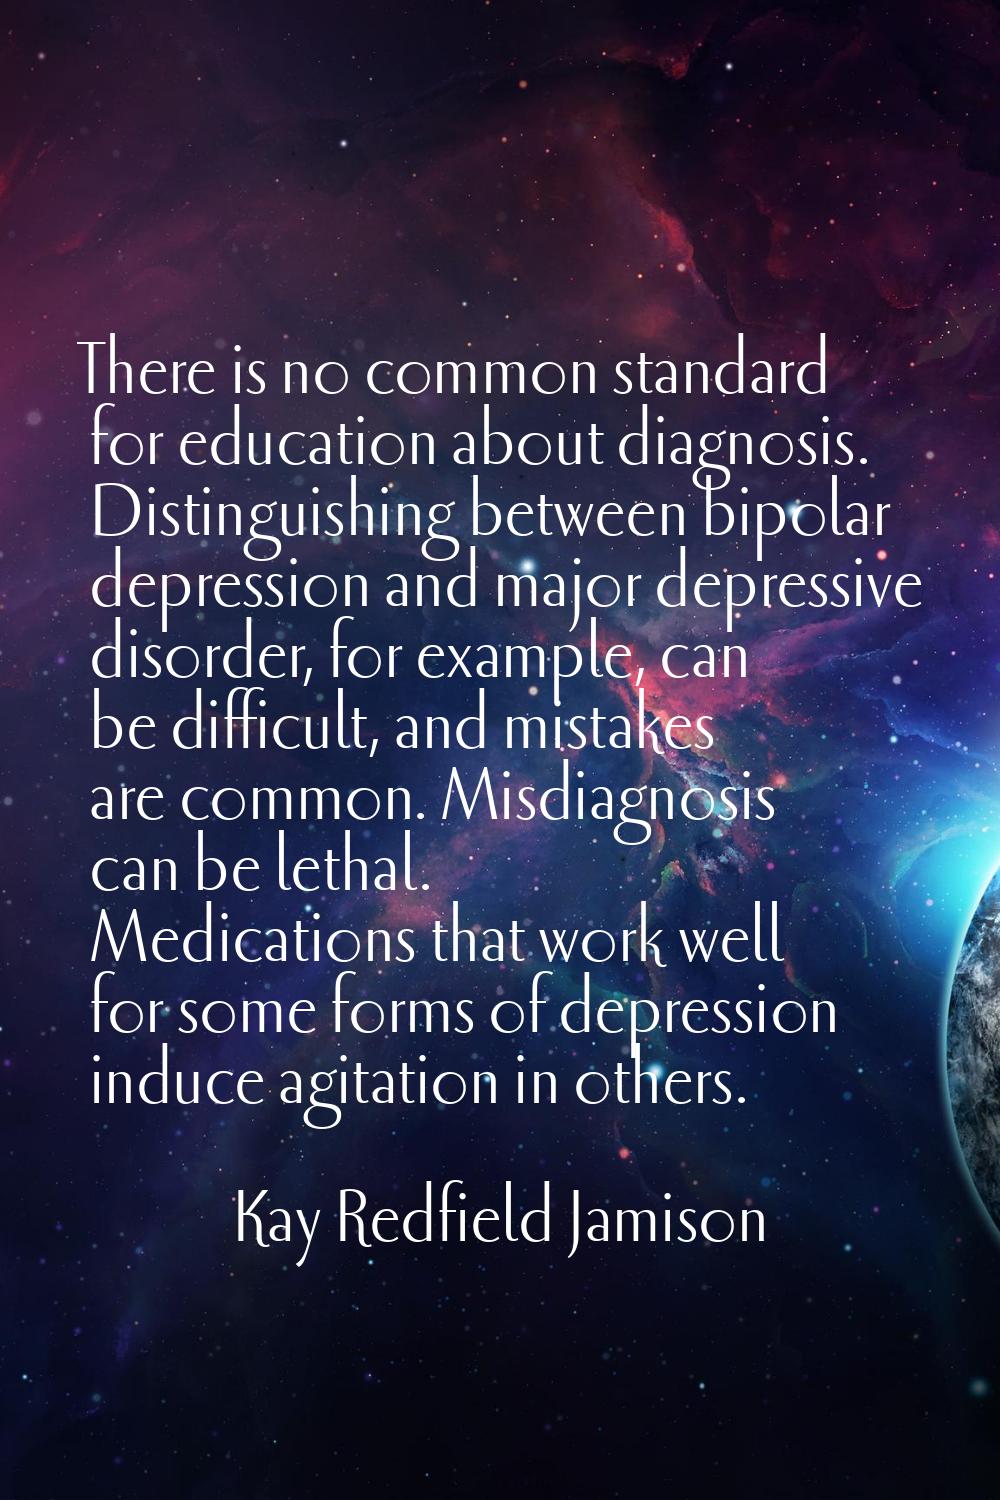 There is no common standard for education about diagnosis. Distinguishing between bipolar depressio